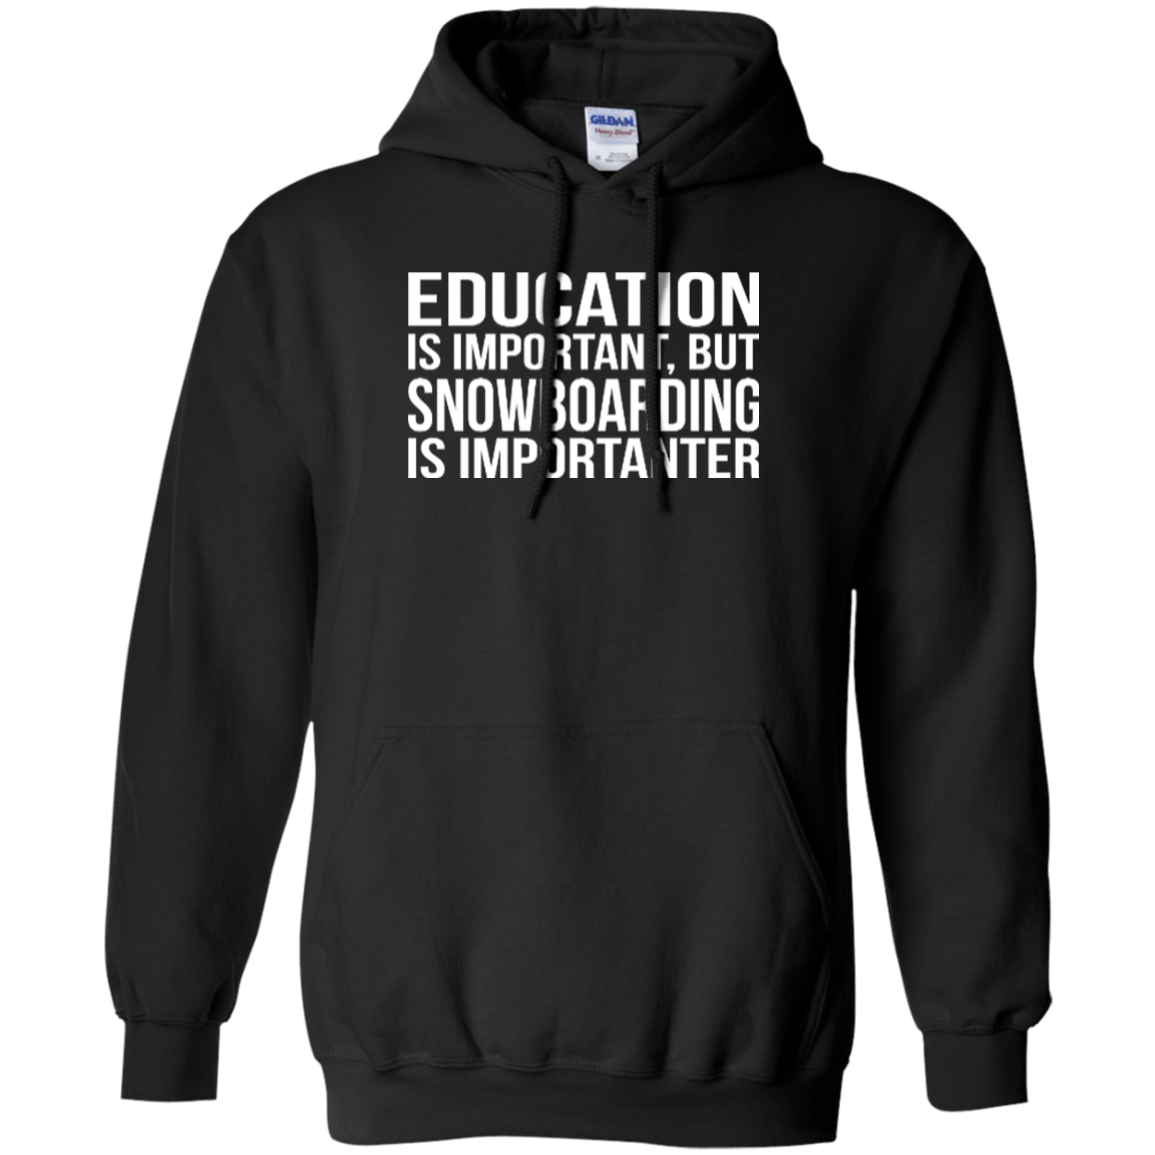 Education Is Important But Snowboarding Is Importanter Hoodies - Powderaddicts